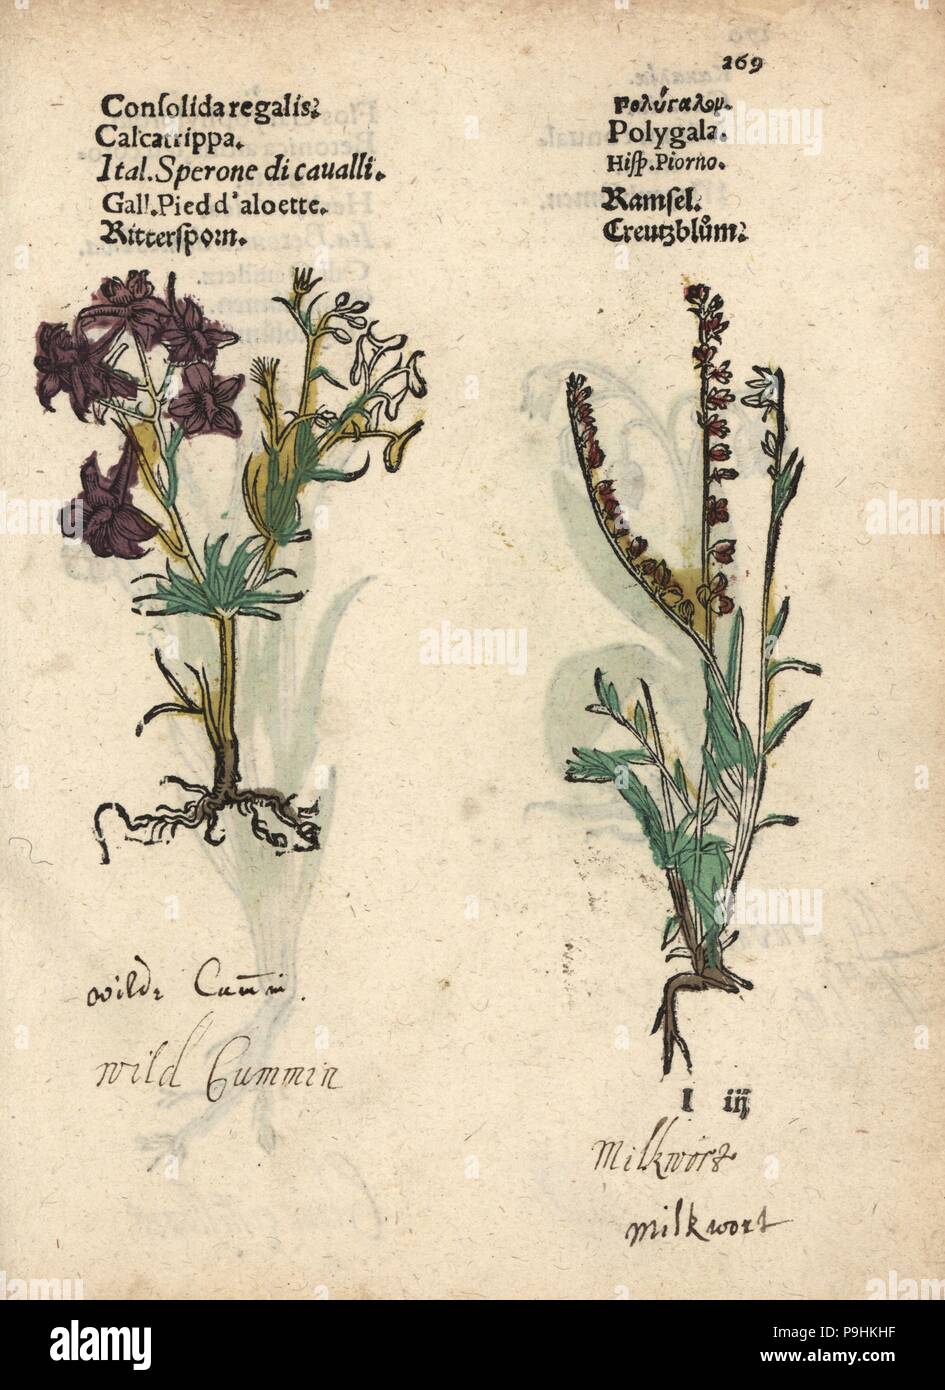 Field larkspur, Consolida regalis, and milkwort, Polygala vulgaris. Handcoloured woodblock engraving of a botanical illustration from Adam Lonicer's Krauterbuch, or Herbal, Frankfurt, 1557. This from a 17th century pirate edition or atlas of illustrations only, with captions in Latin, Greek, French, Italian, German, and in English manuscript. Stock Photo